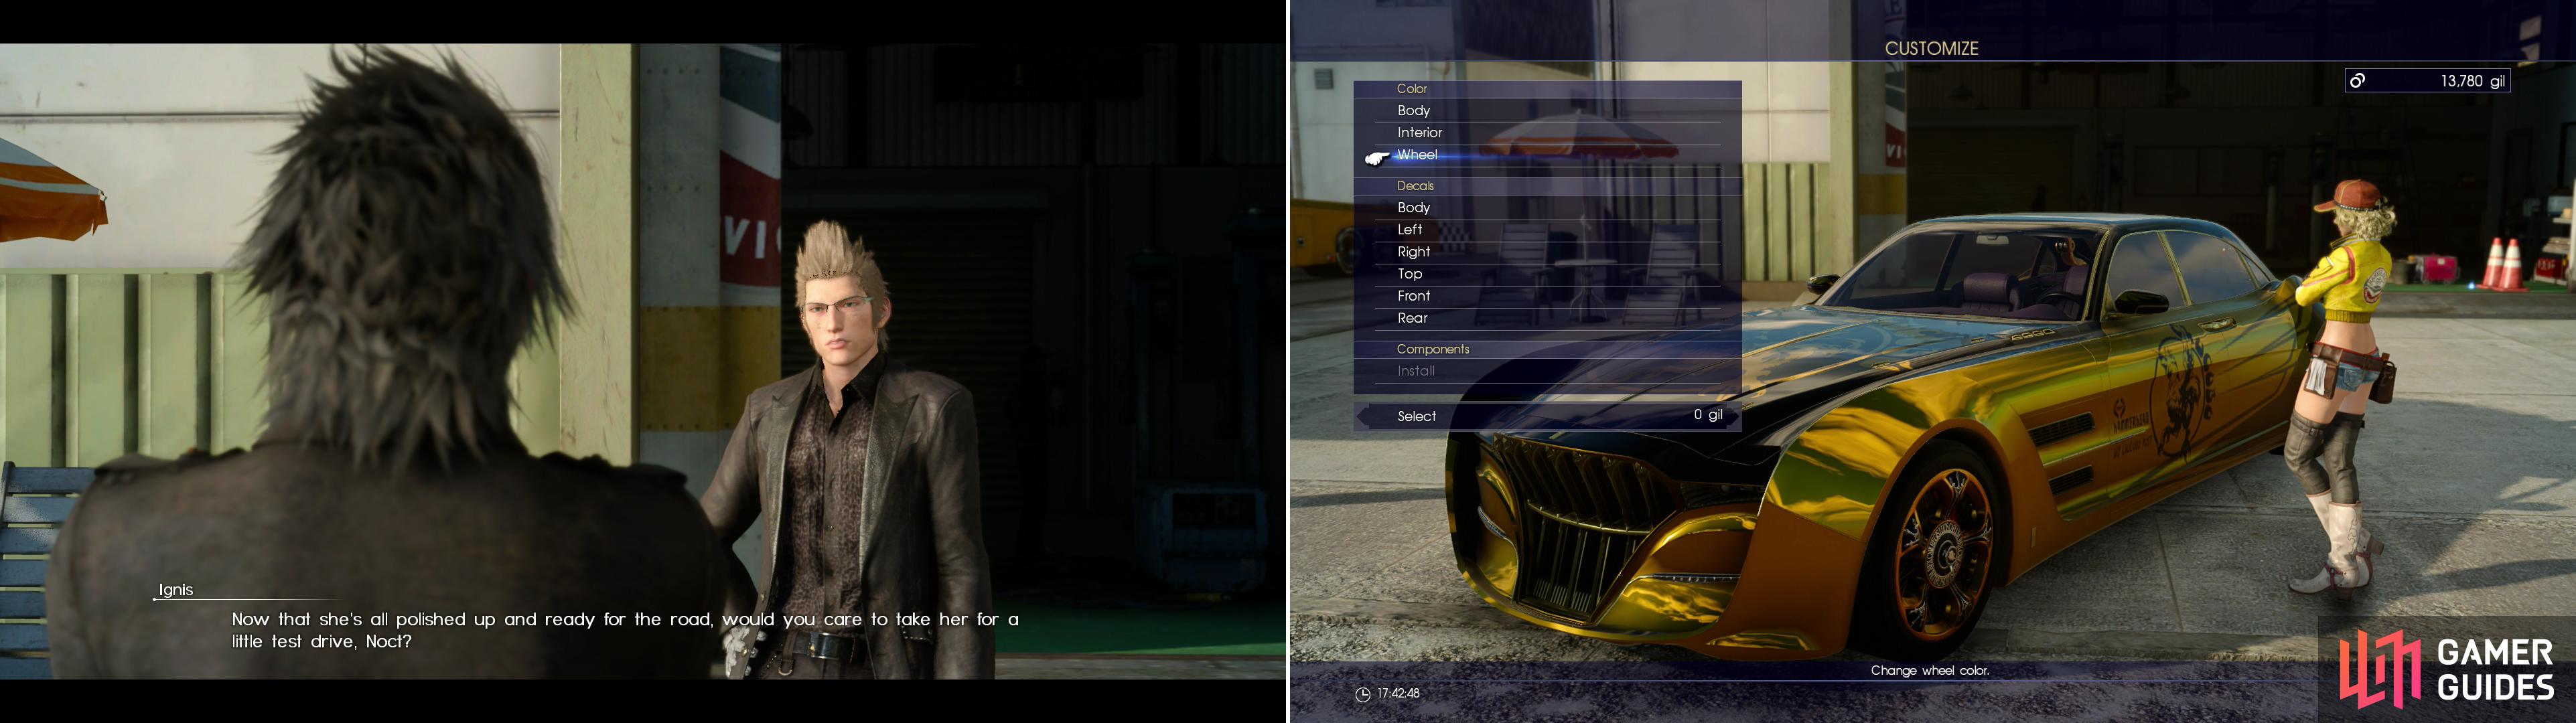 Now that the Regalia is repaired, Ignis is willing to temporarily give you the keys (left). You can customize the Regalia by bringing it back to Cindy (right).